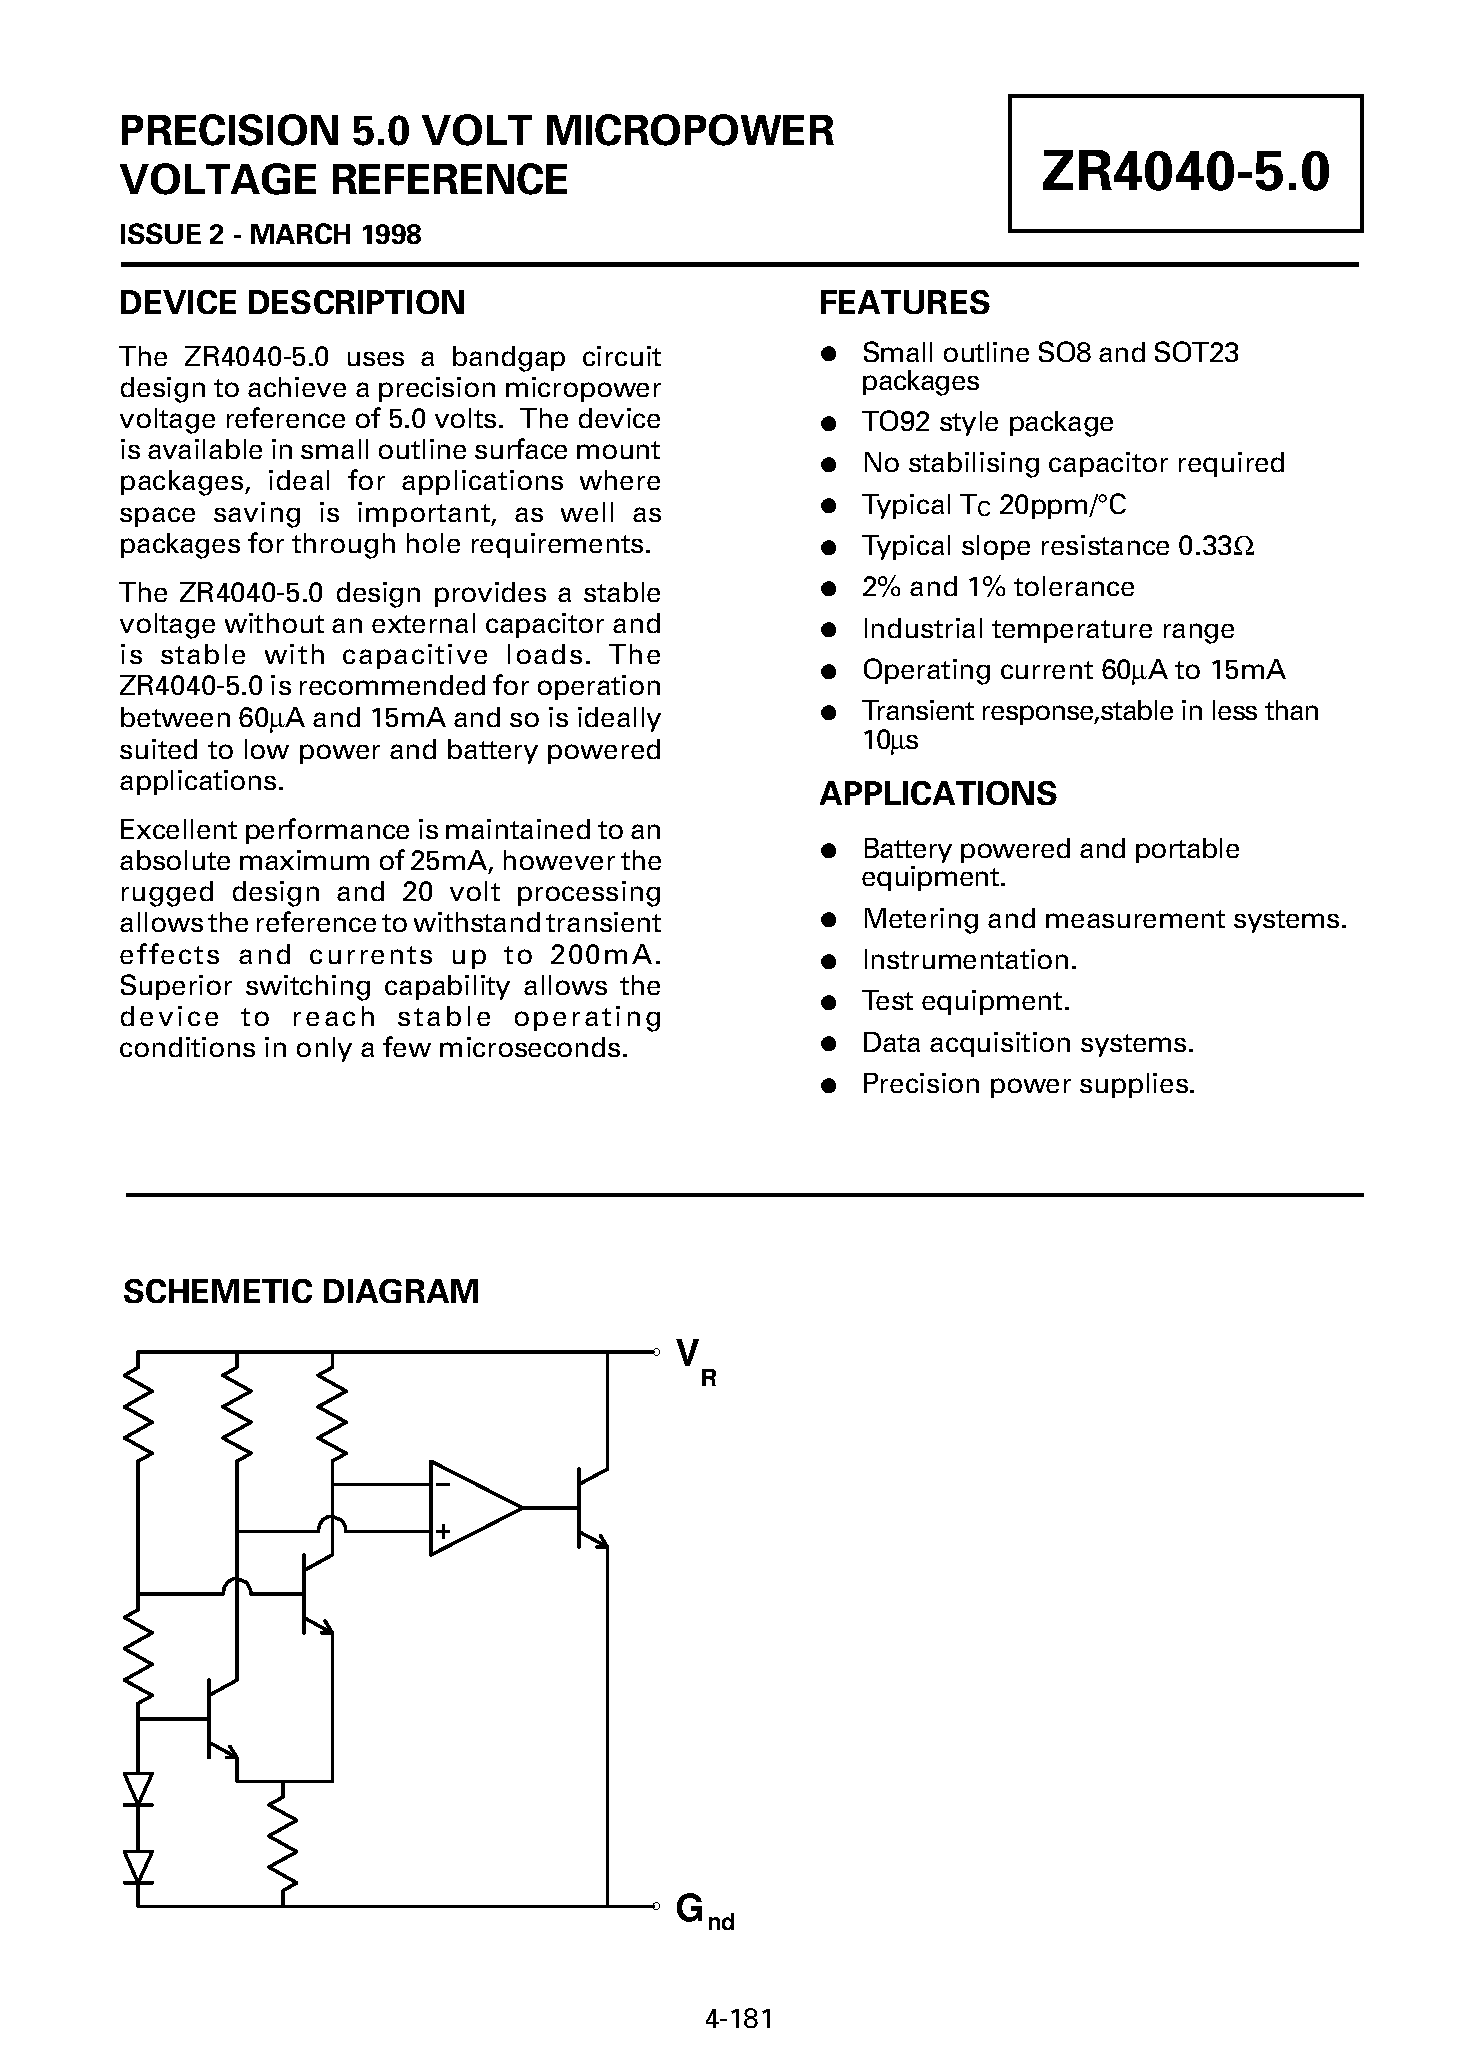 Datasheet ZR4040-5.0 - PRECISION 5.0 VOLT MICROPOWER VOLTAGE REFERENCE page 1